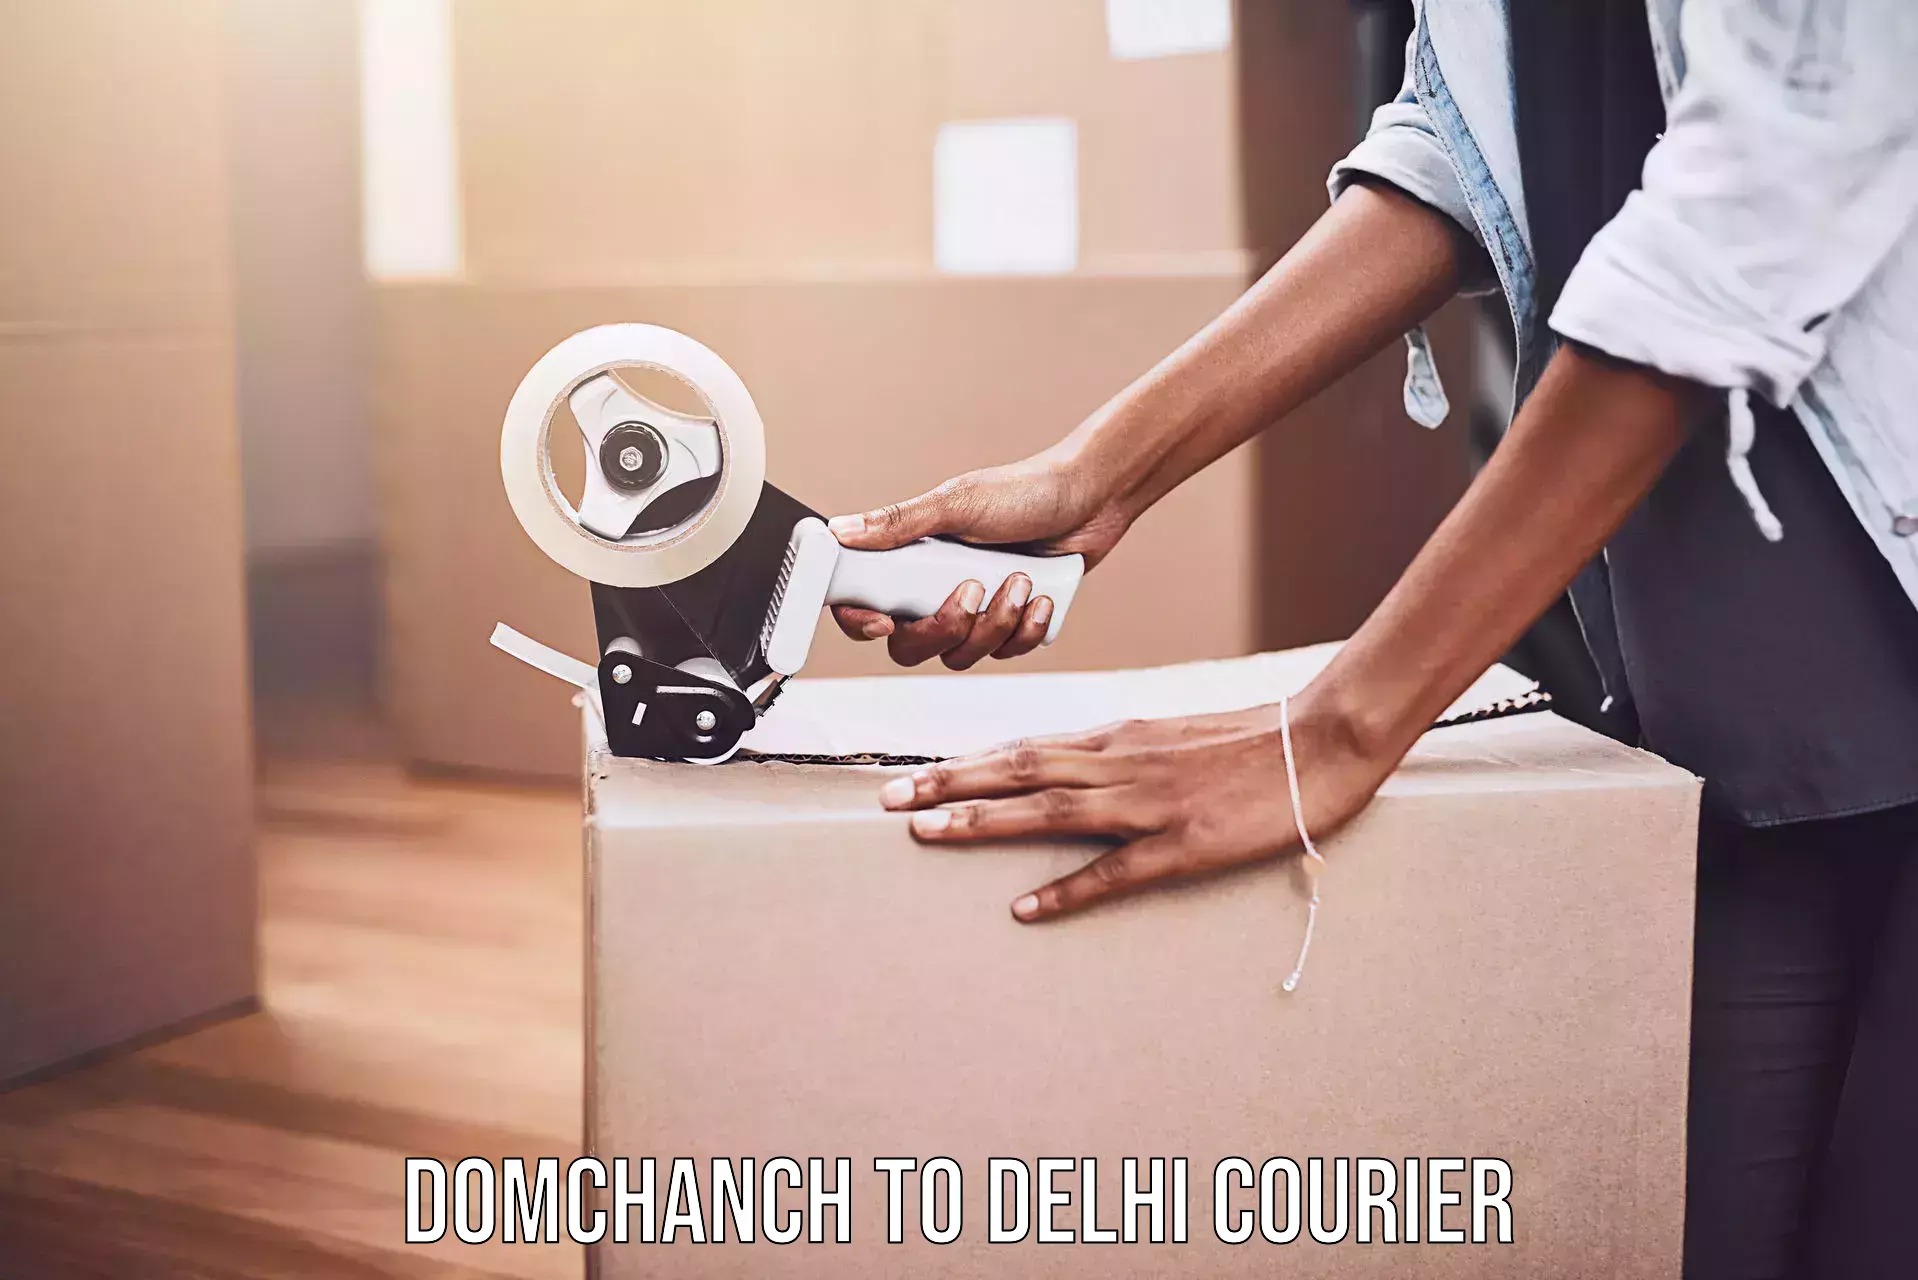 Local delivery service Domchanch to East Delhi